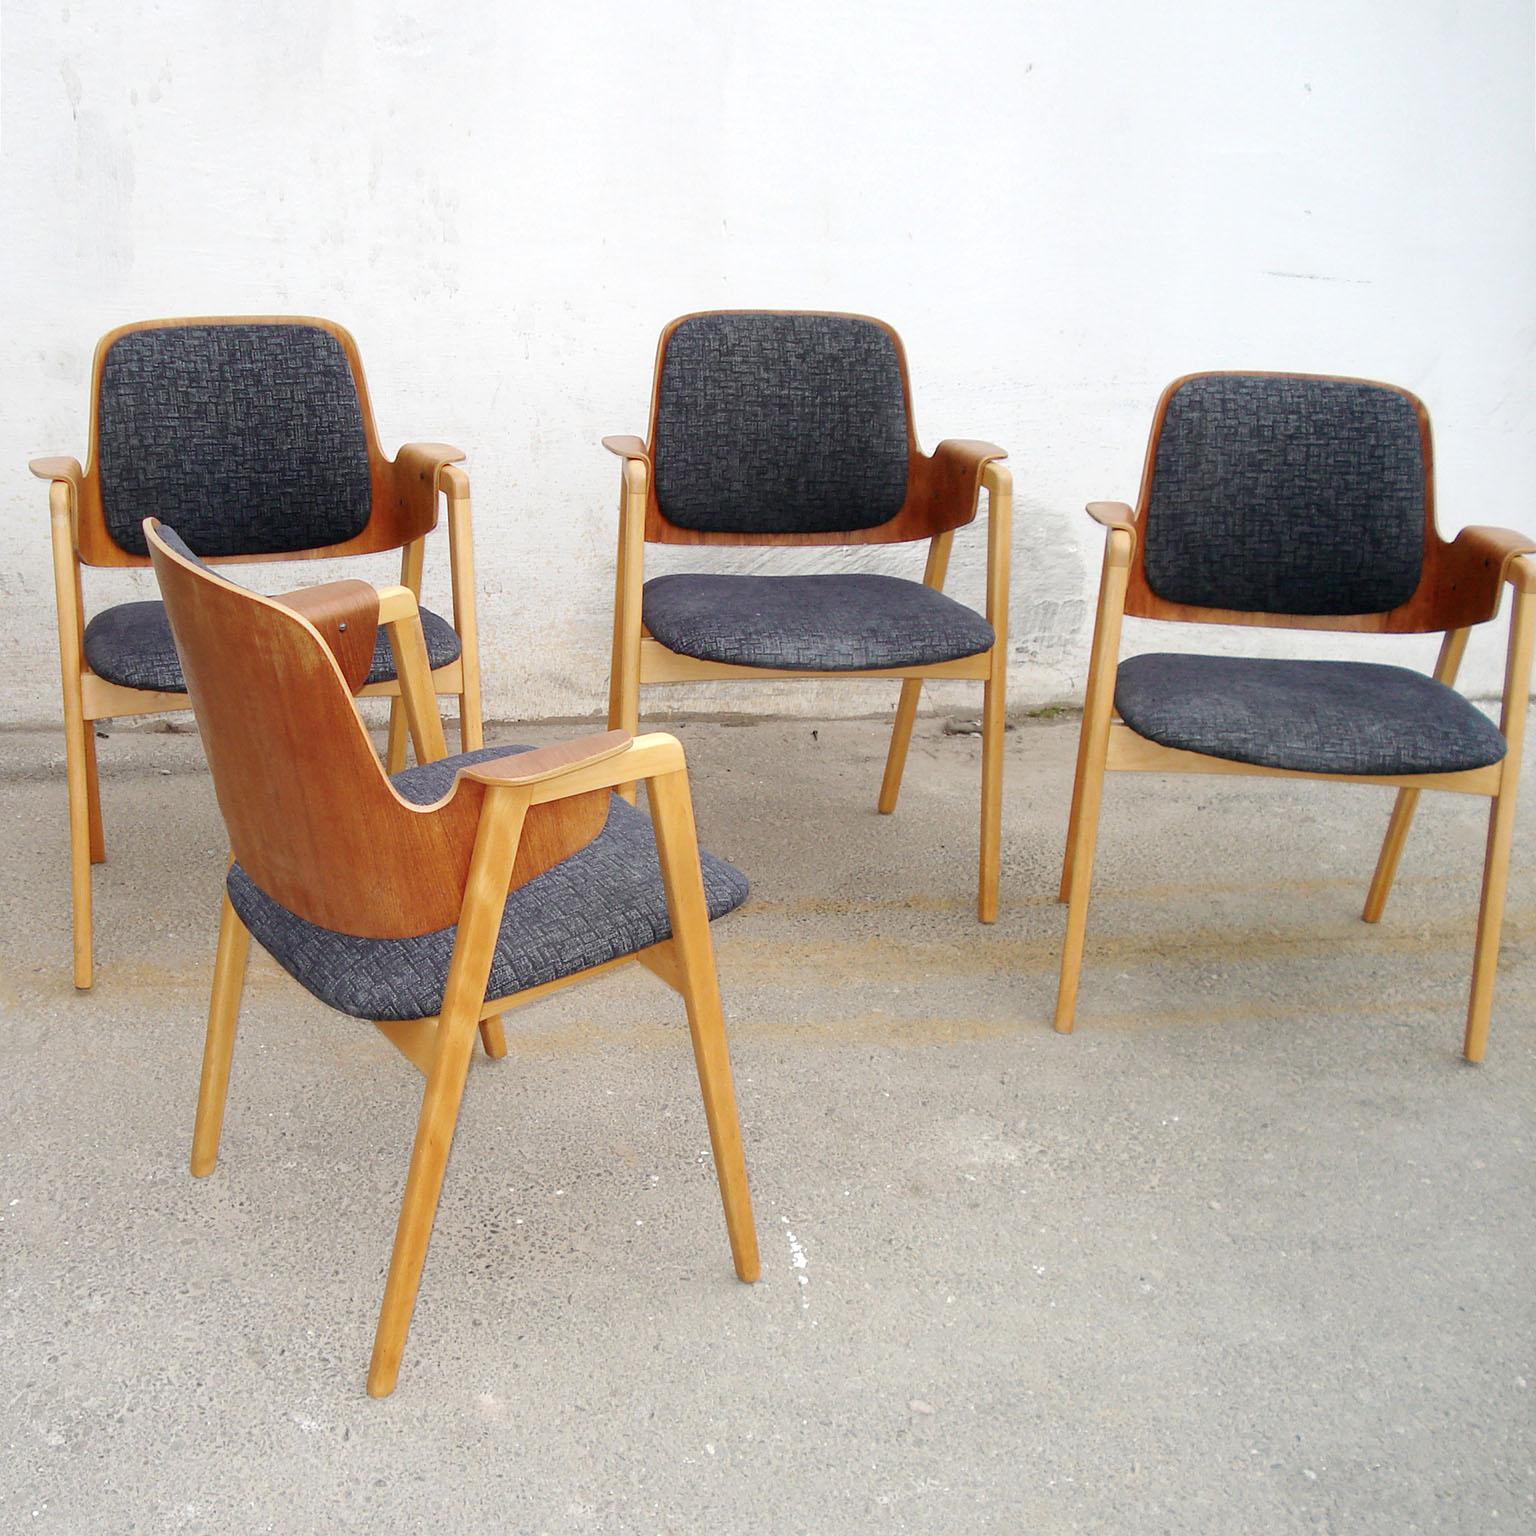 Mid-Century Modern Set of 4 Elias Barup Teak Dining Chairs with Original Upholstery, 1950s Sweden For Sale